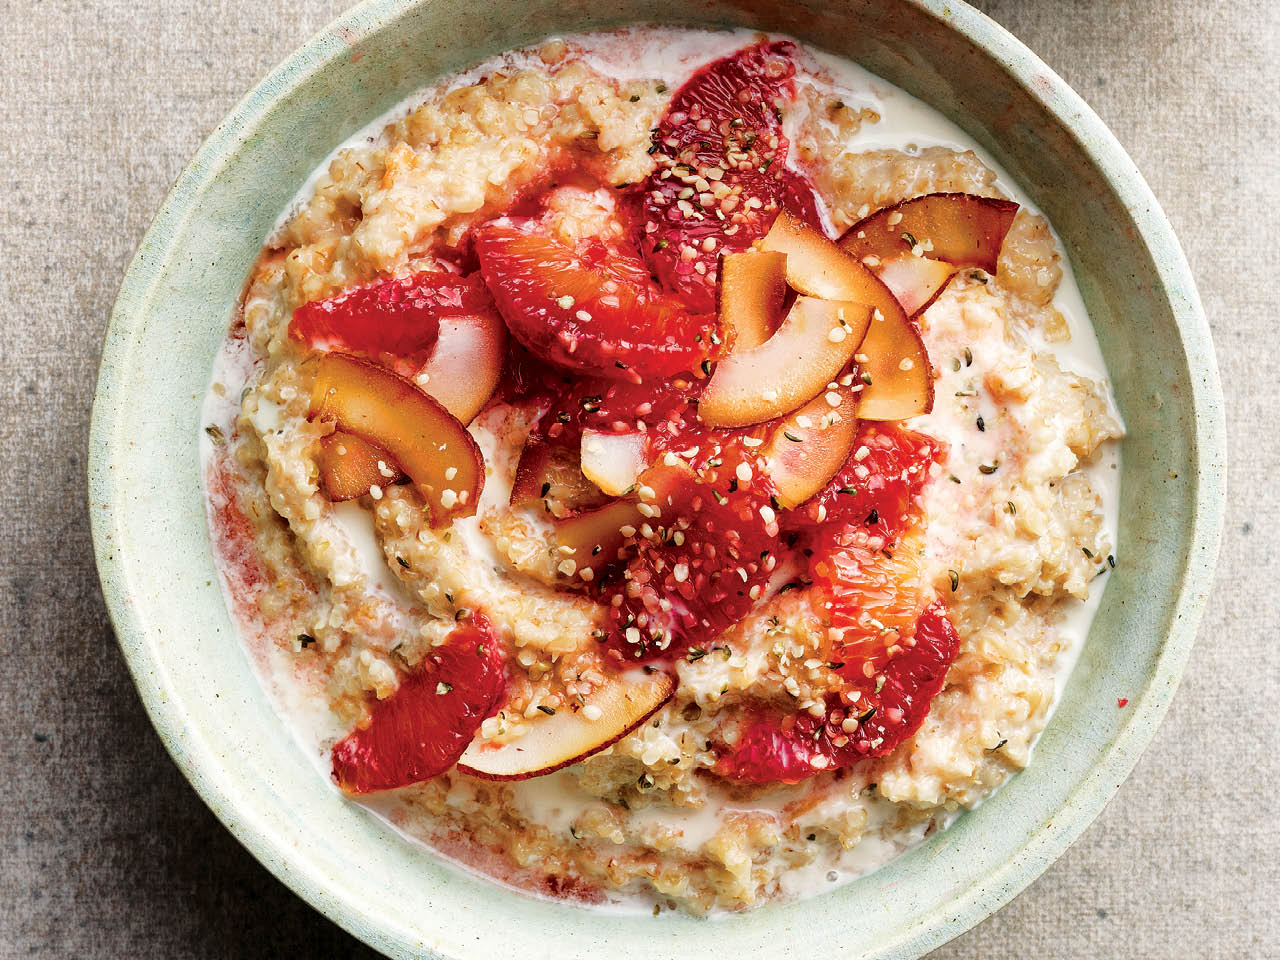 creamy coconut steel-cut oats with blood orange compote